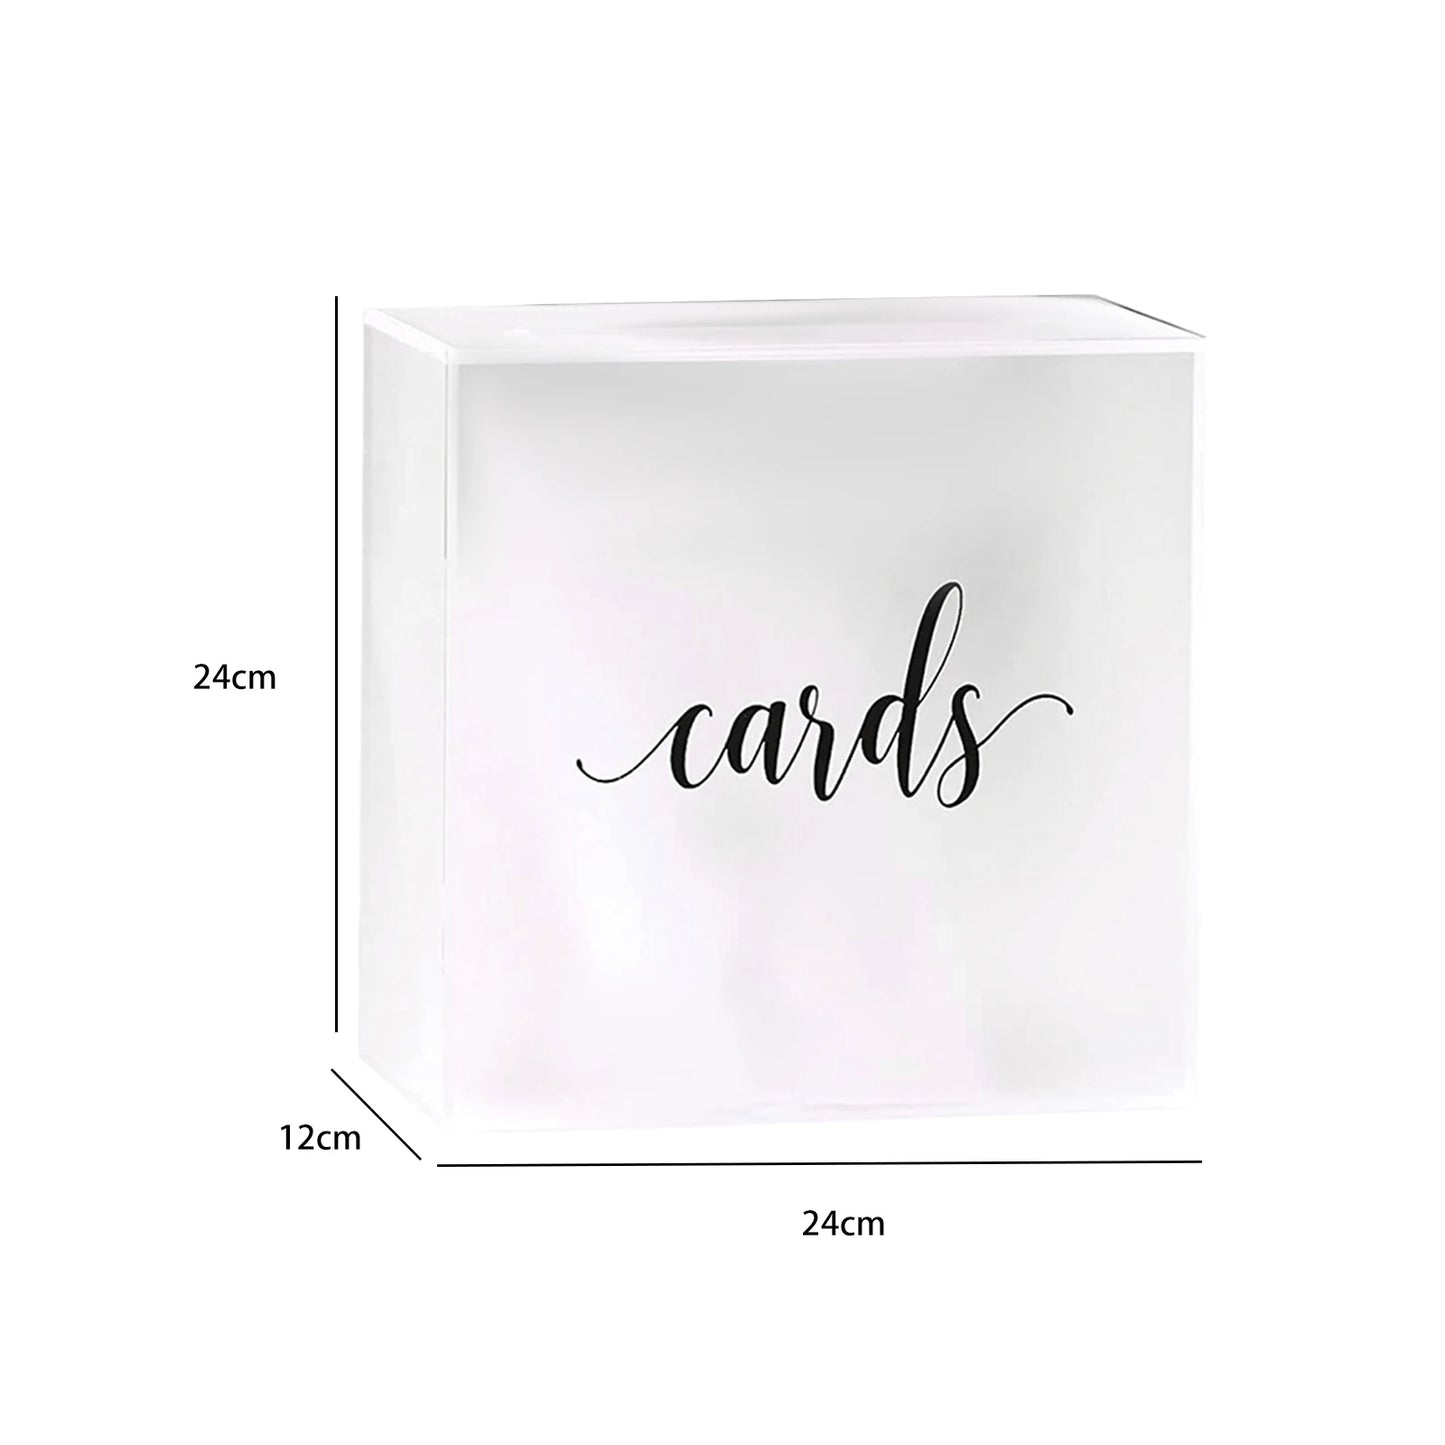 Acrylic card box with different sizes